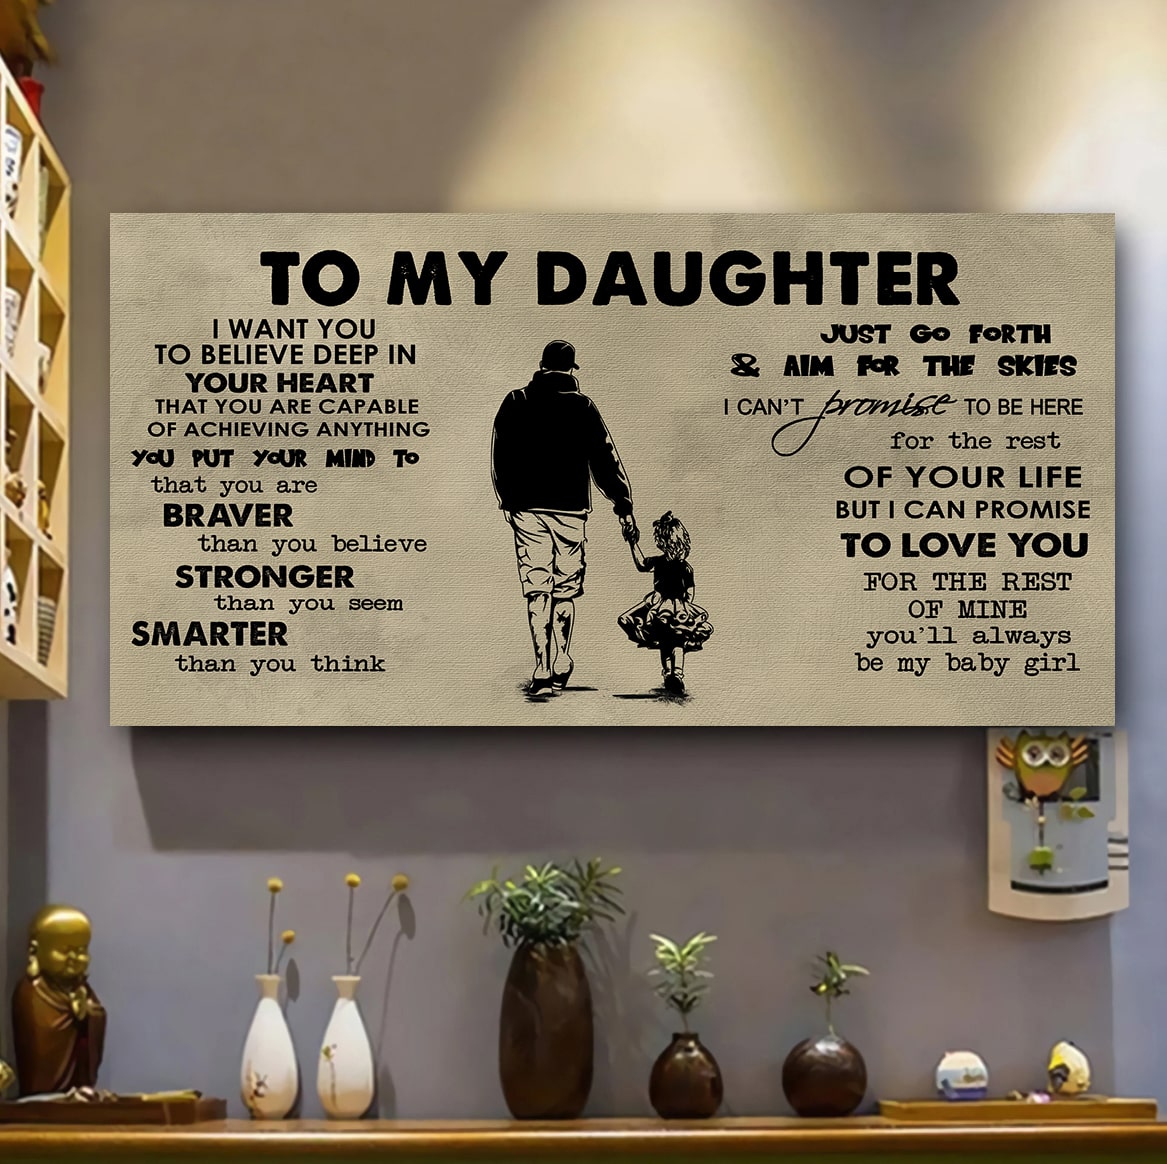 HOCKEY TO MY SON- I WANT YOU TO BELIEVE- CANVAS POSTER